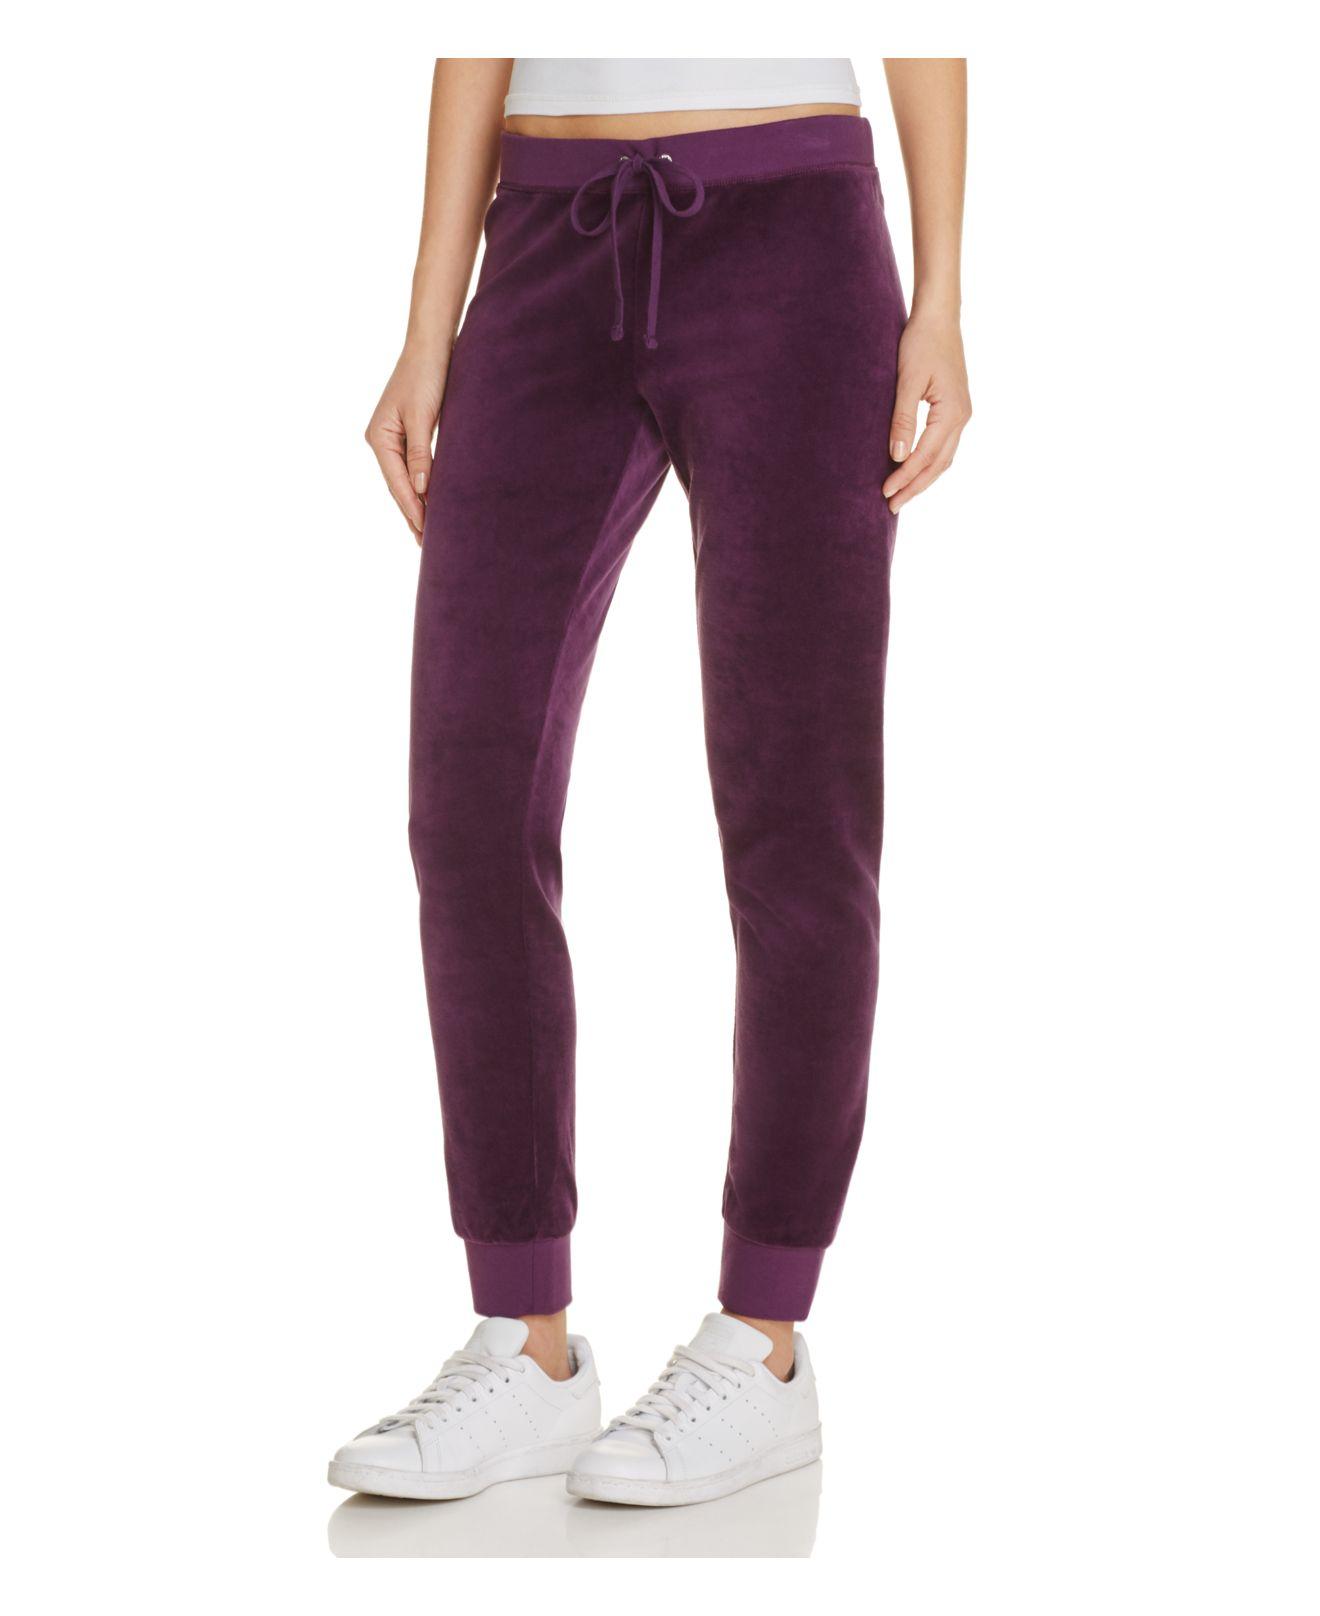 Lyst - Juicy couture Zuma Velour Jogger Pants in Purple